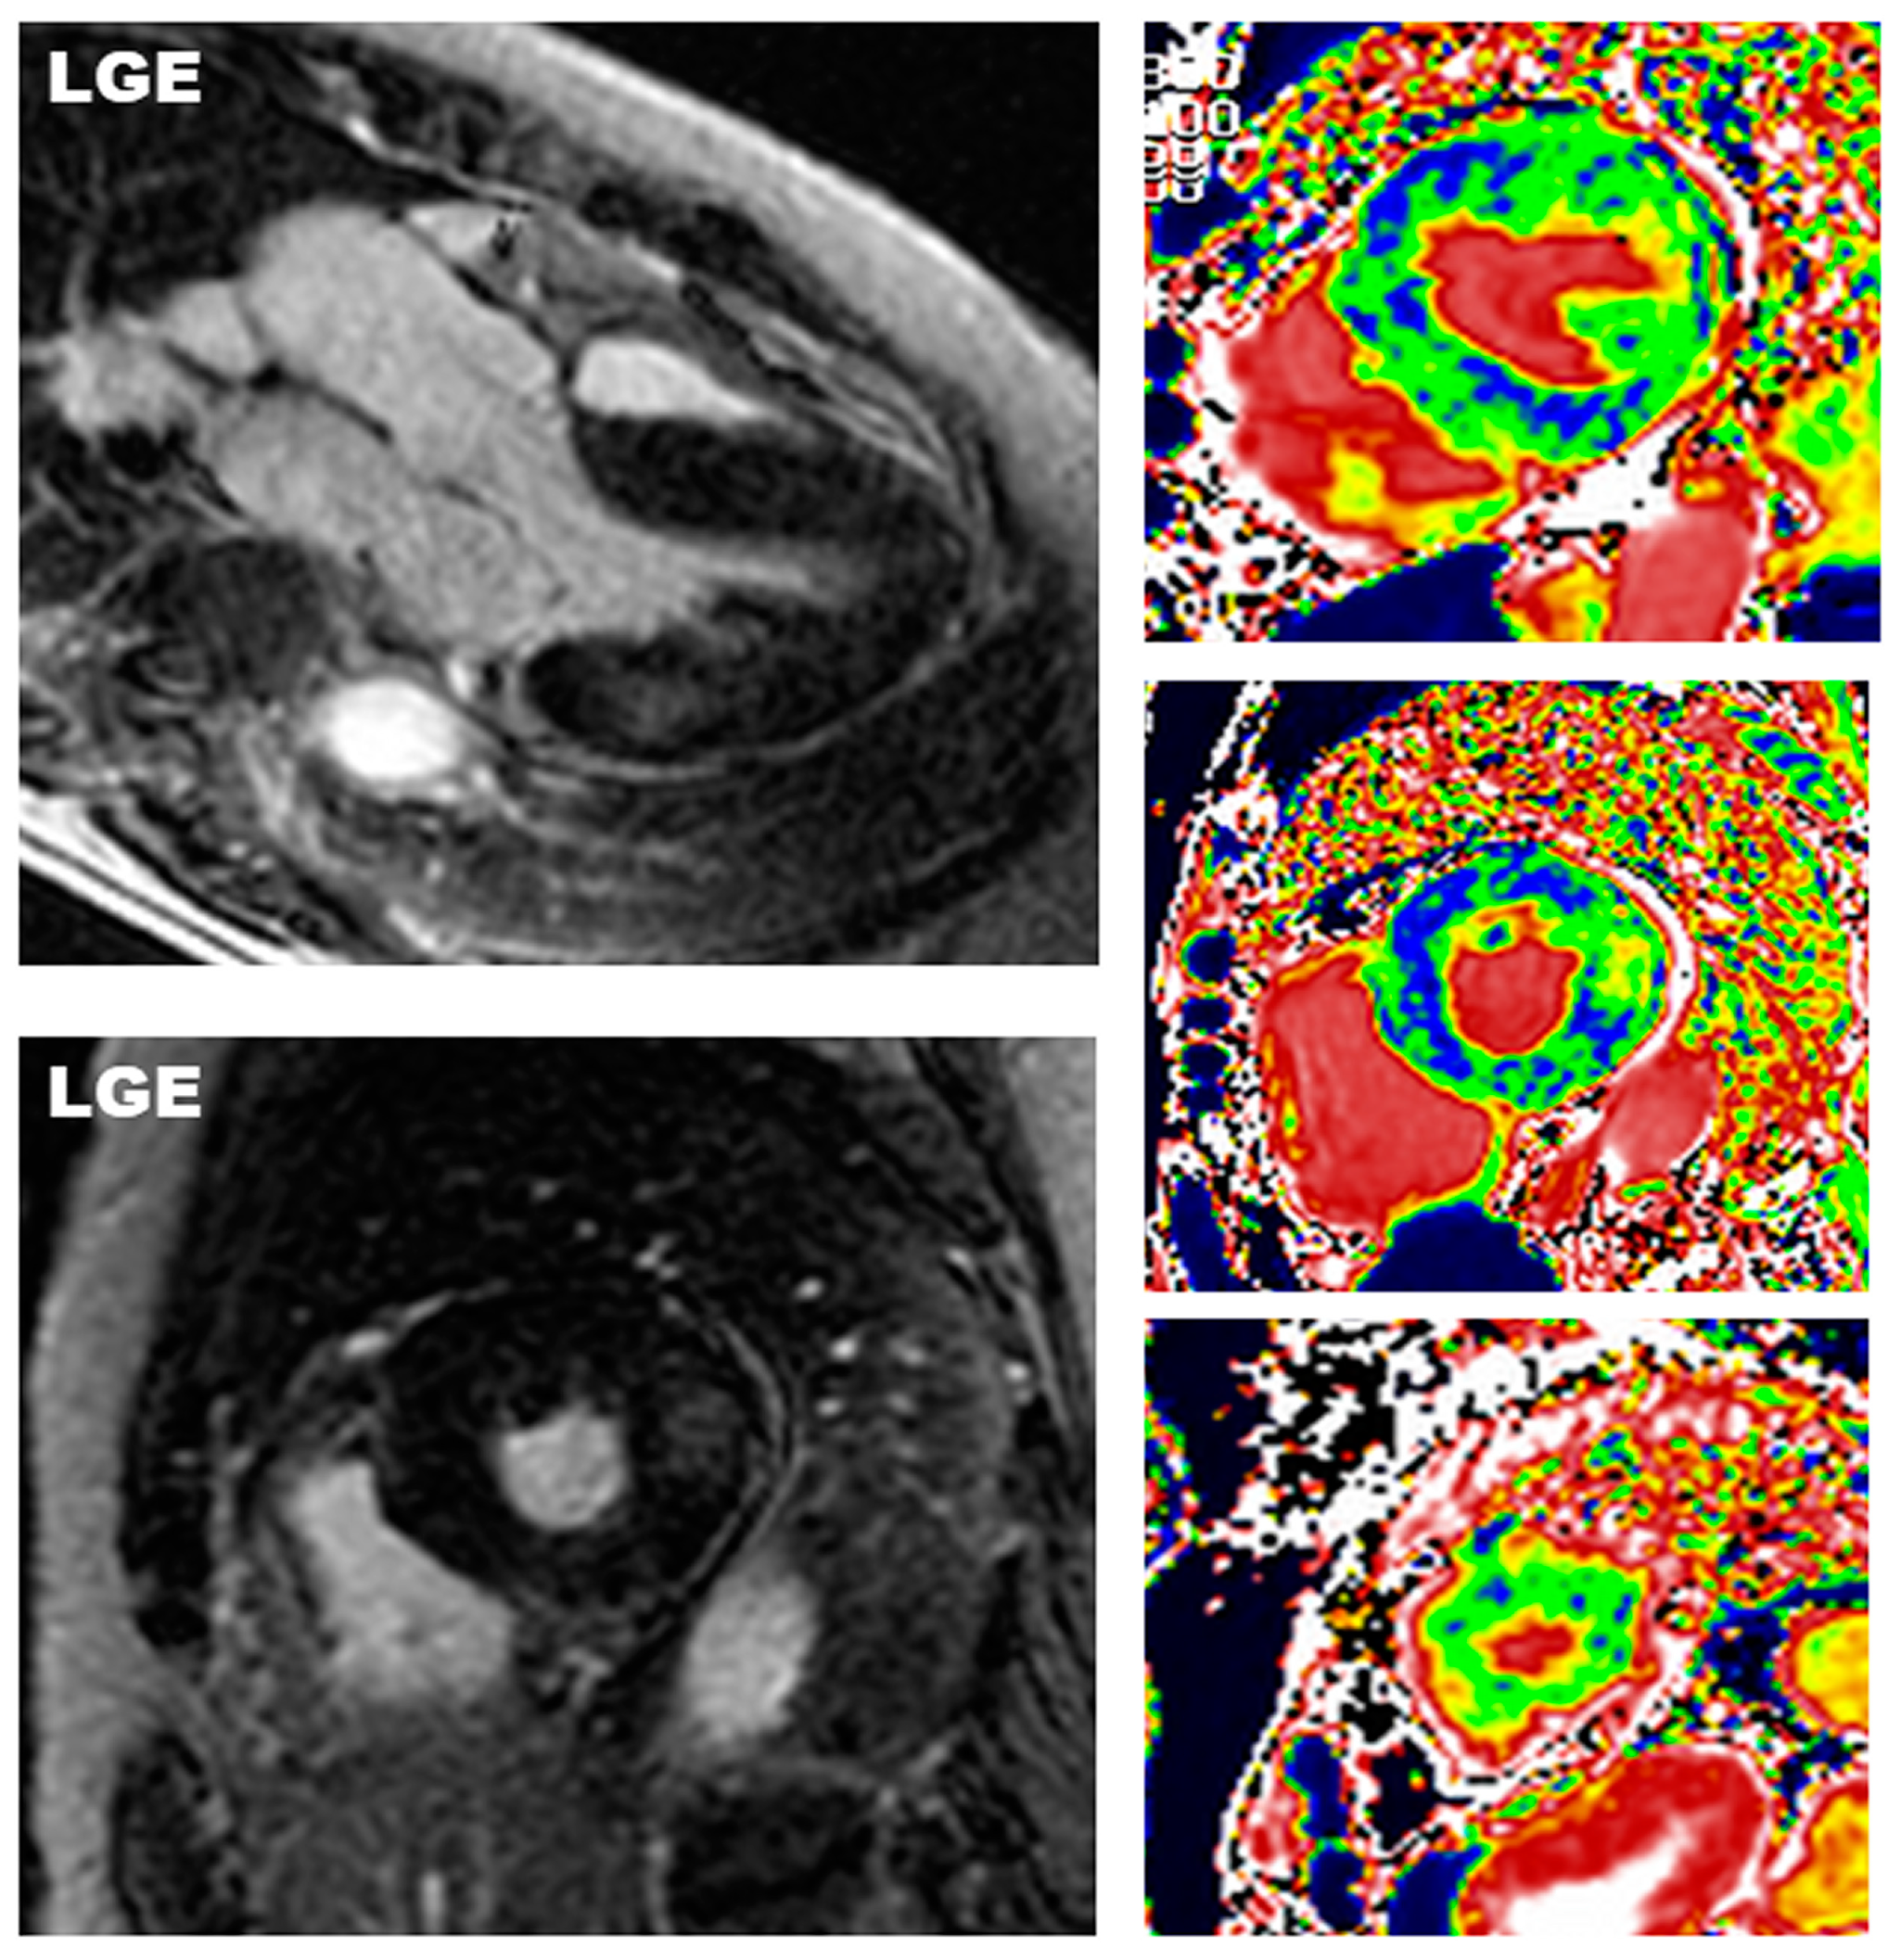 Diagnostics | Free Full-Text | Cardiac Magnetic Resonance in Fabry Disease:  Morphological, Functional, and Tissue Features | HTML